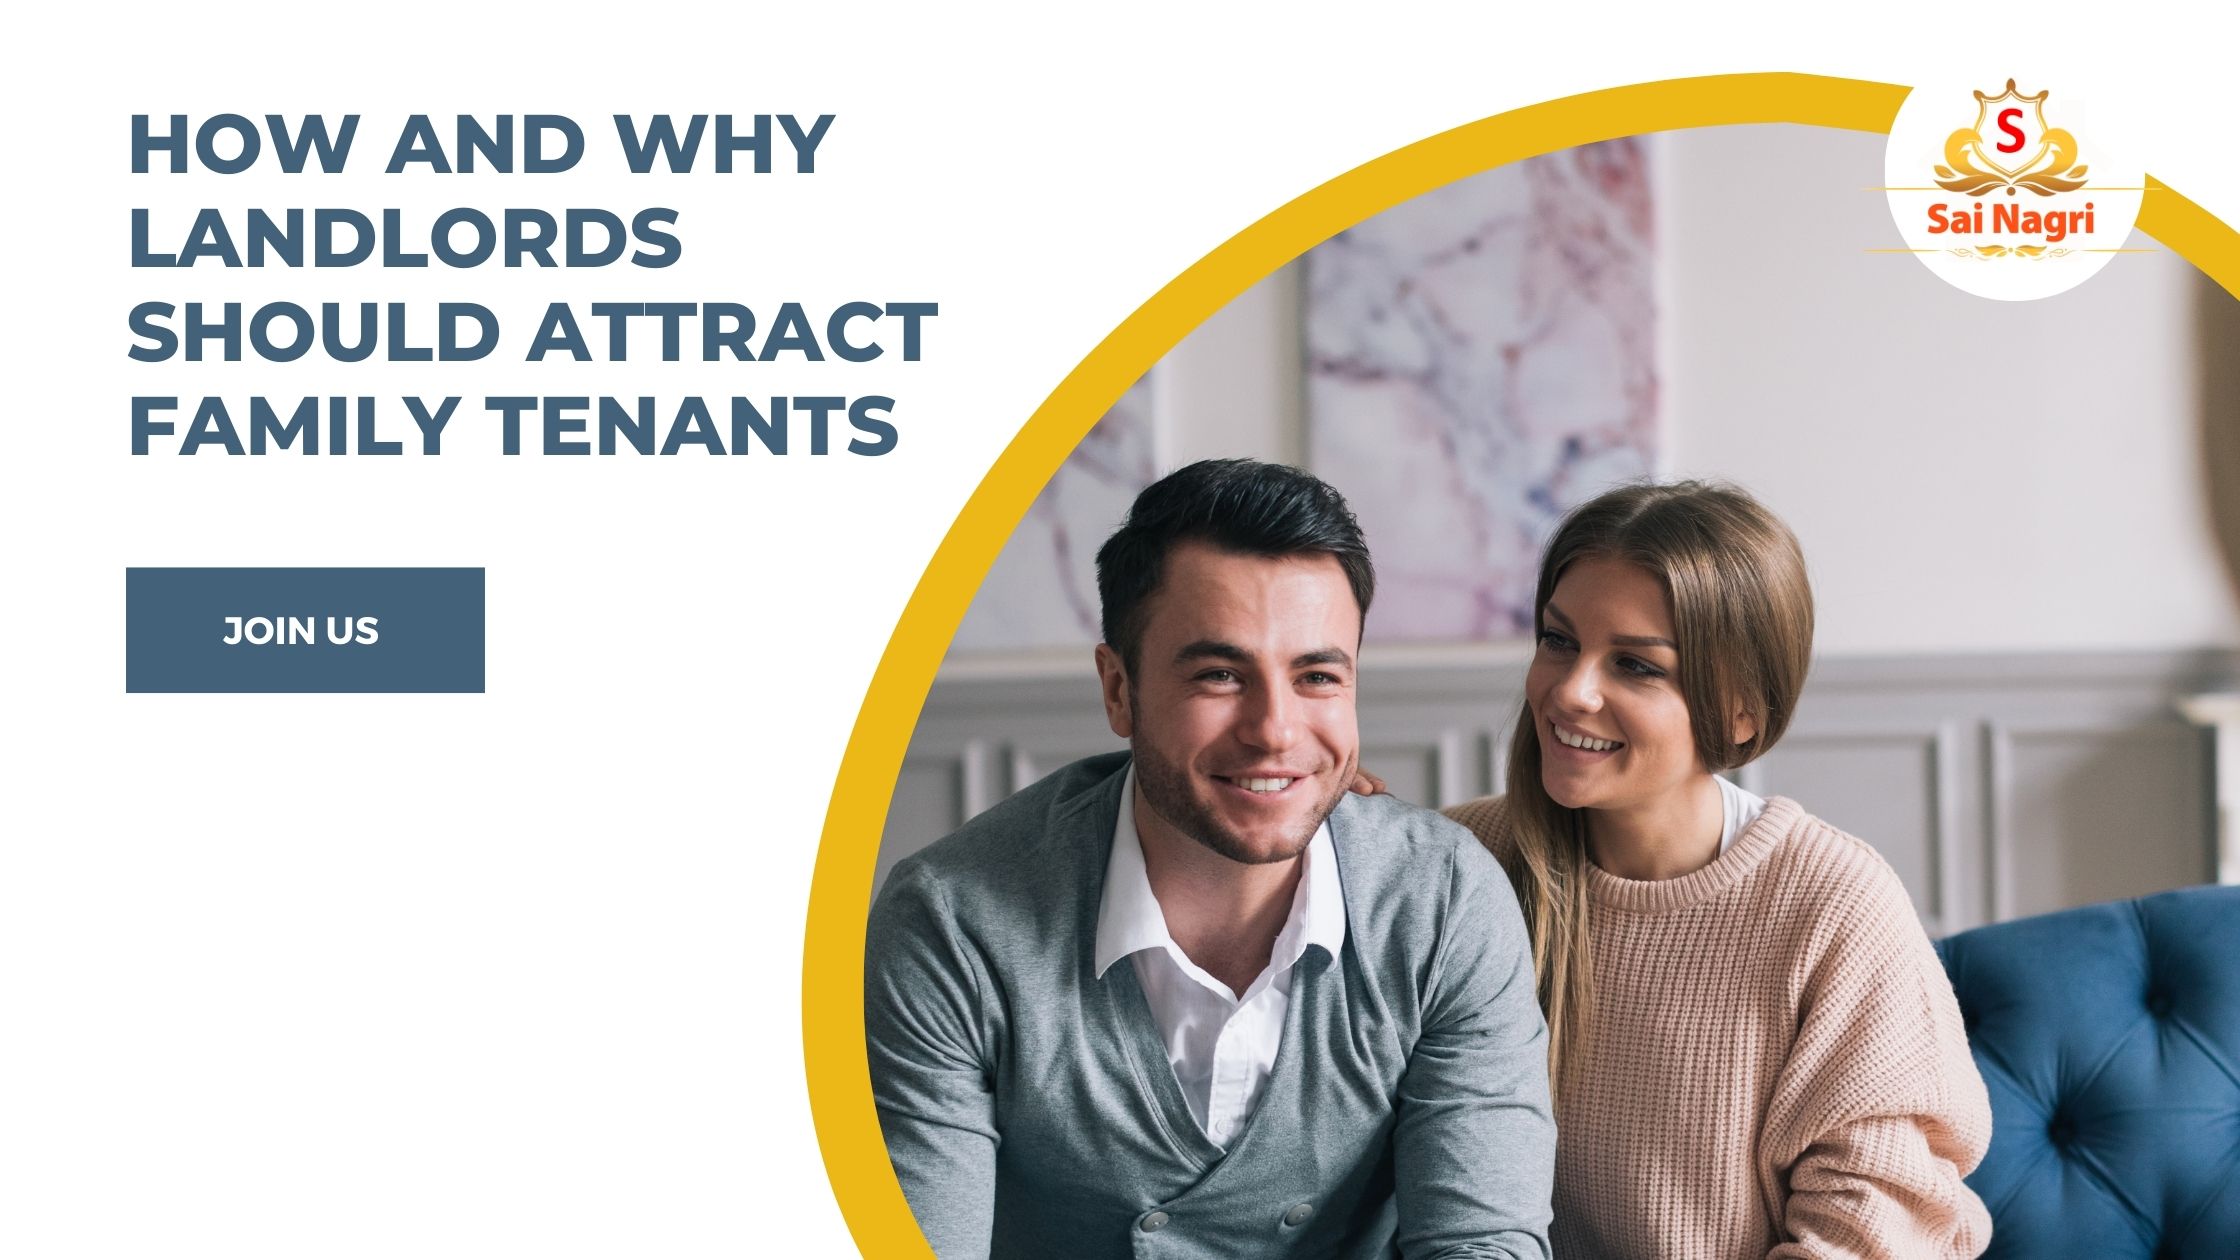  How and why landlords should attract family tenants